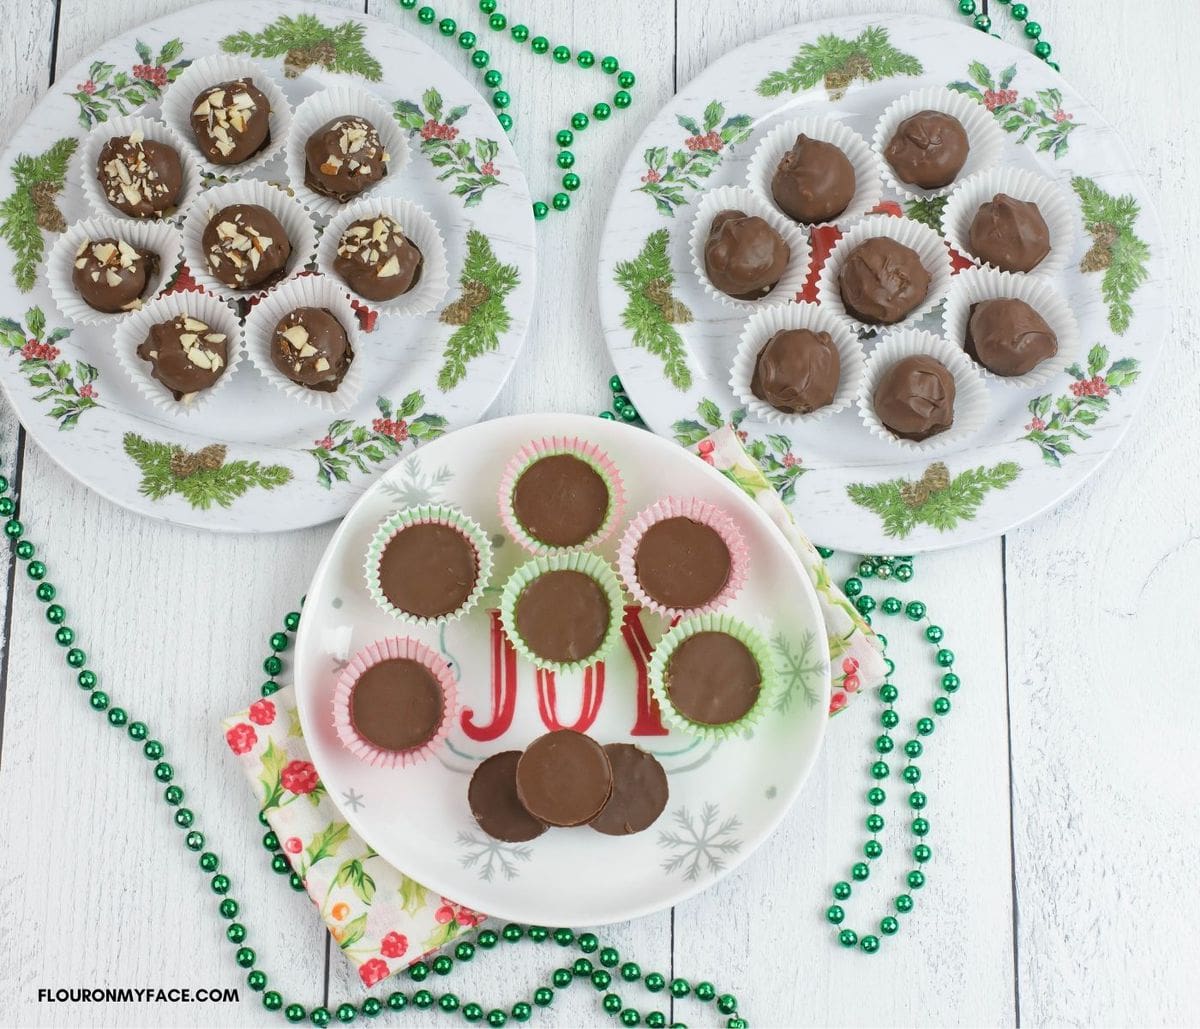 Chocolate covered coconut candy for Christmas made three different ways on holiday plates.